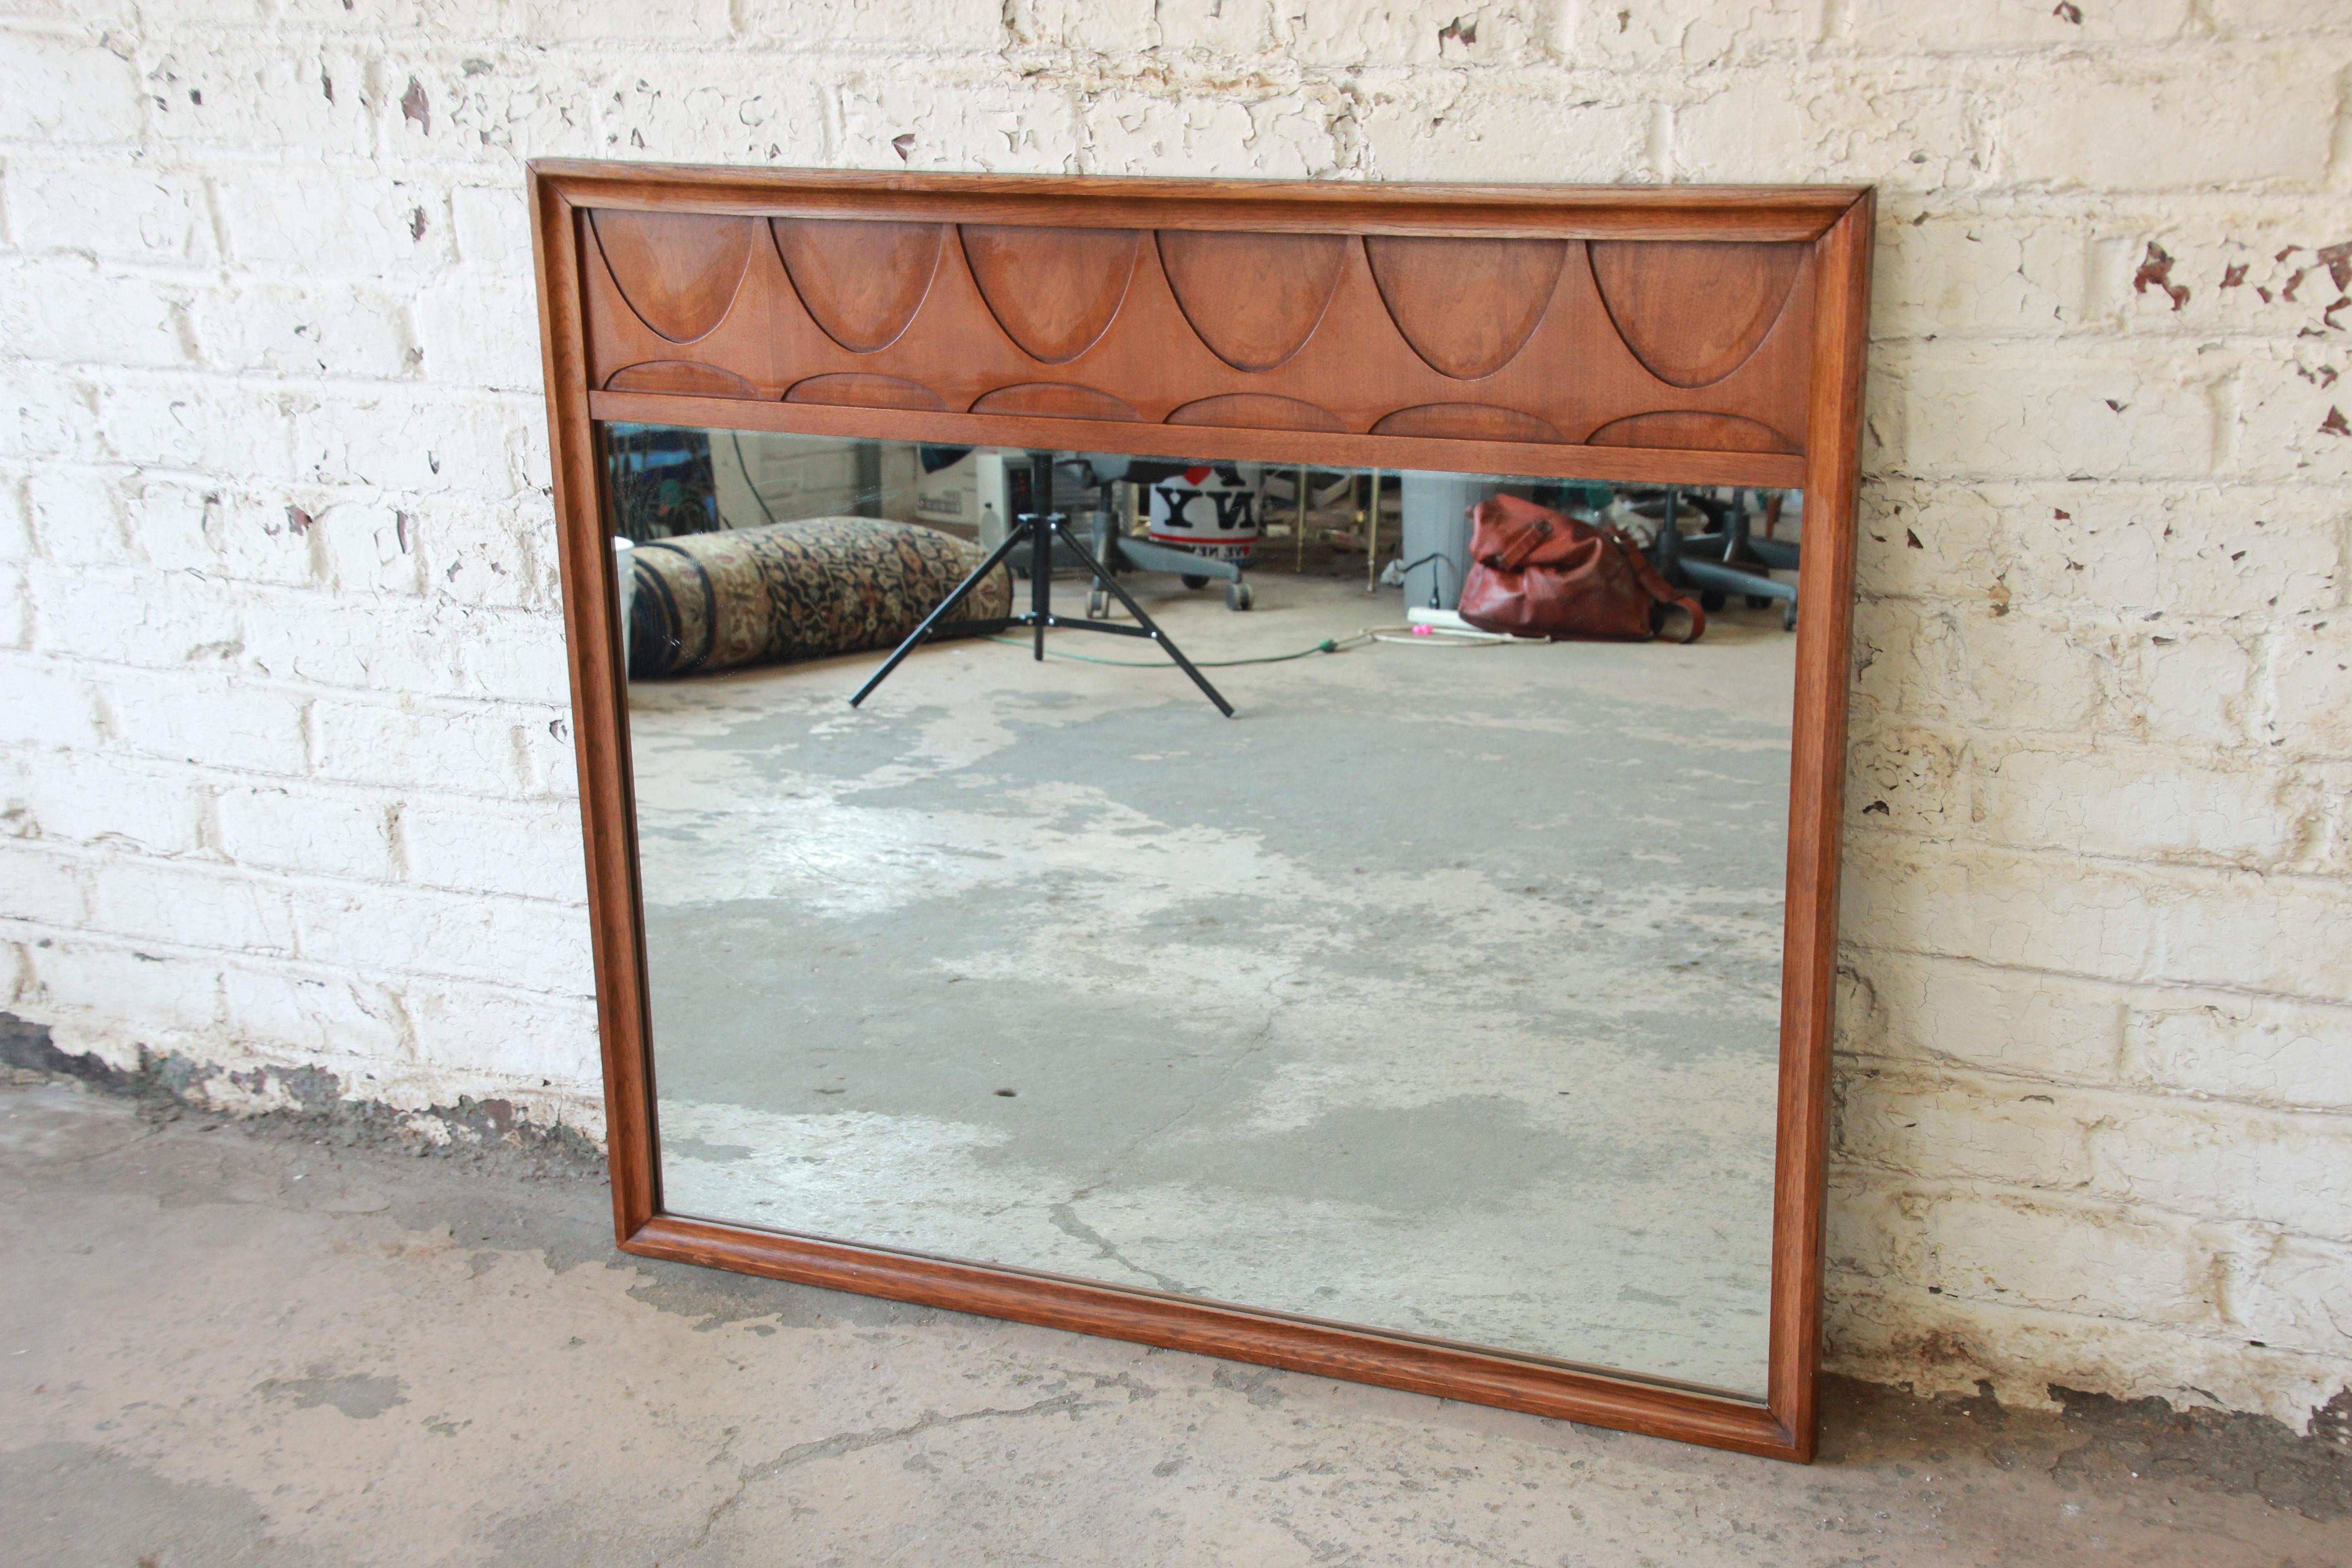 Offering a very nice Broyhill Brasilia sculpted walnut Mid-Century Modern mirror. The mirror has a nice walnut wood frame. The mirror is in good vintage condition with wear to the surface of the top of the mirror.